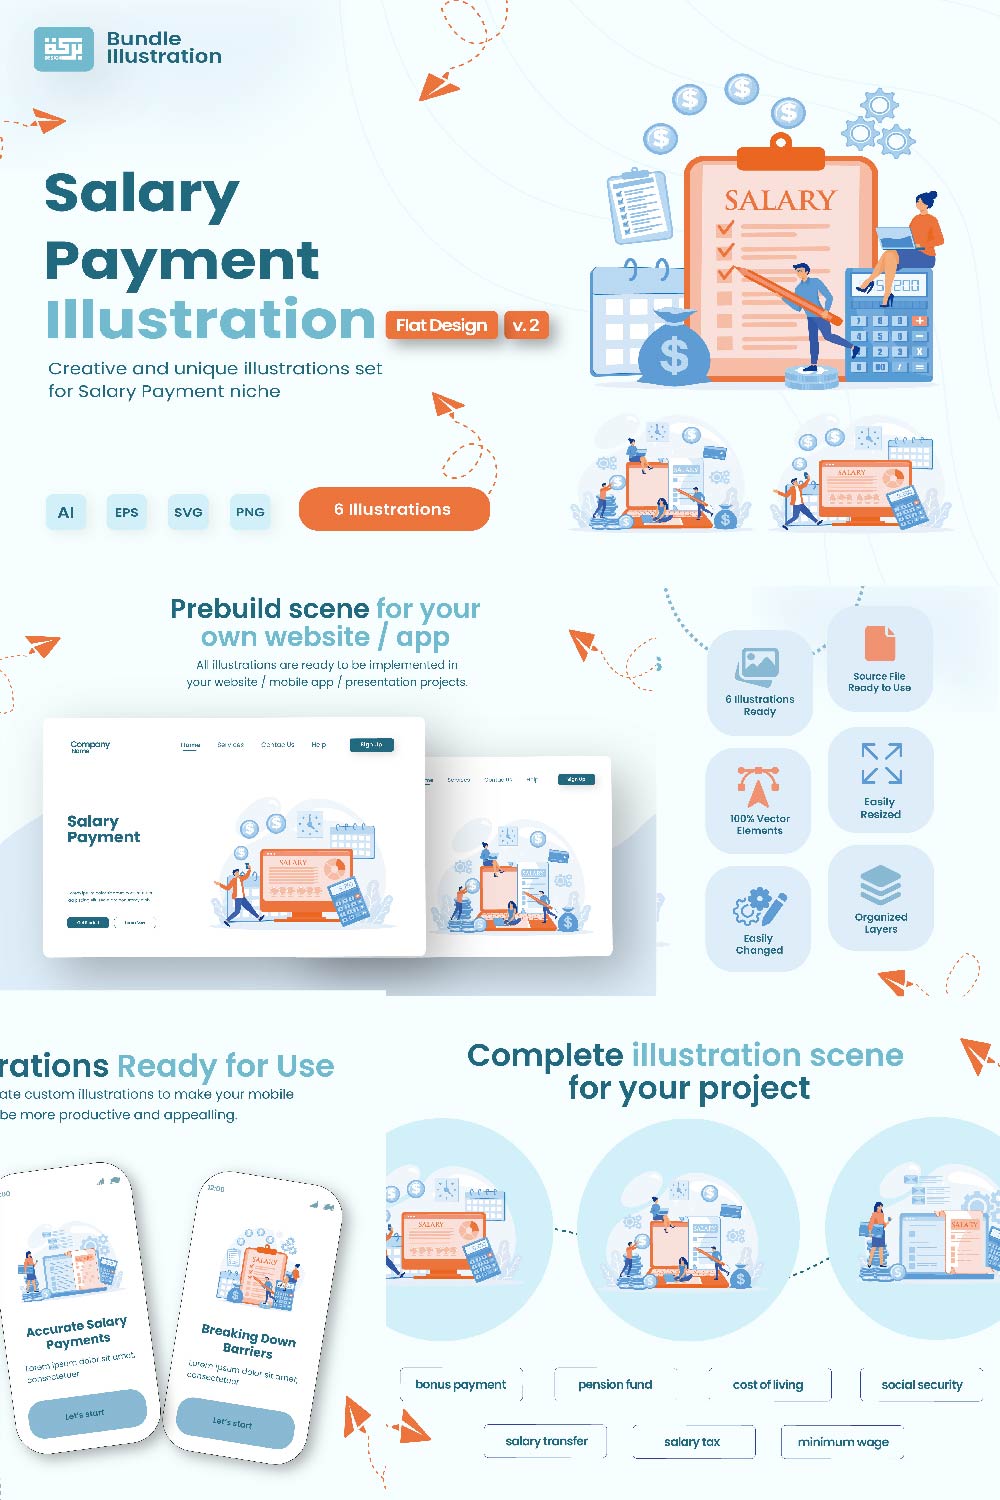 Illustration Design Salary Payment 2 pinterest preview image.